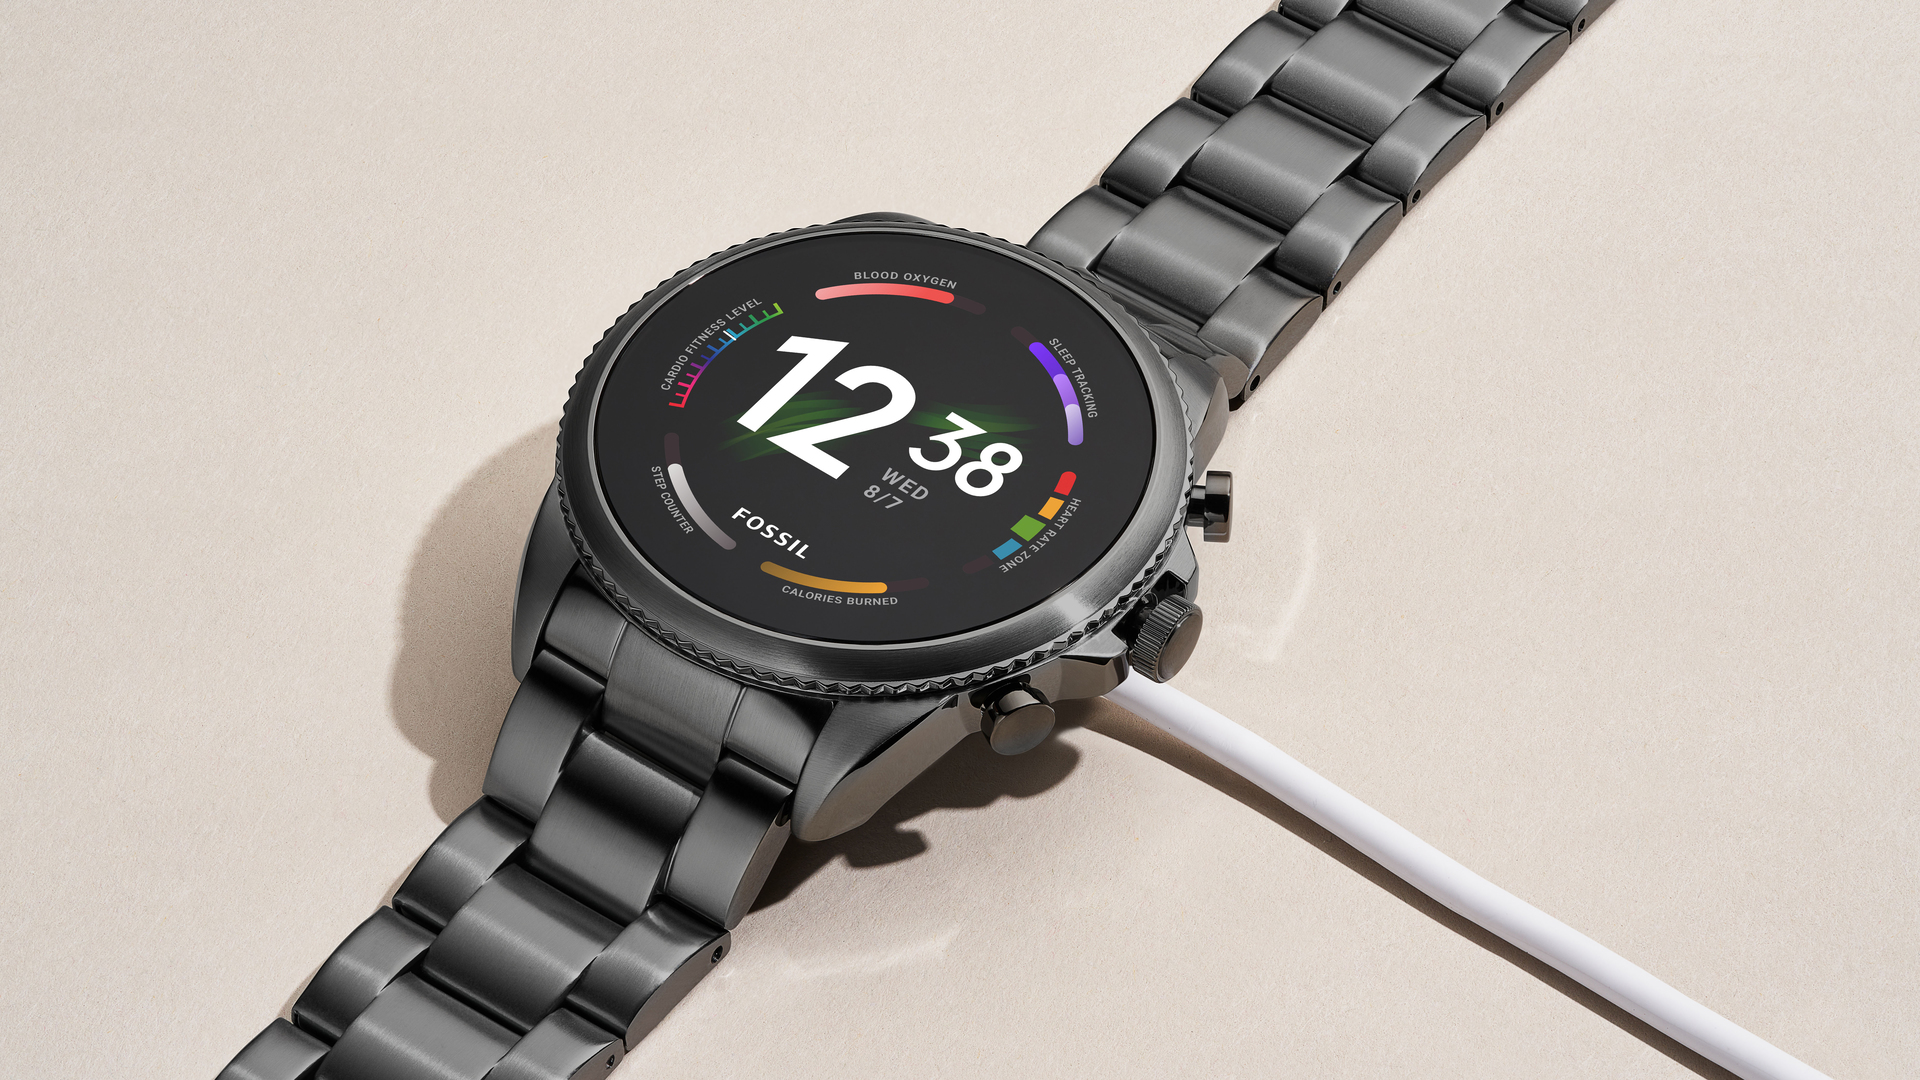 Fossil Gen 6 smartwatches guide: What you need to know